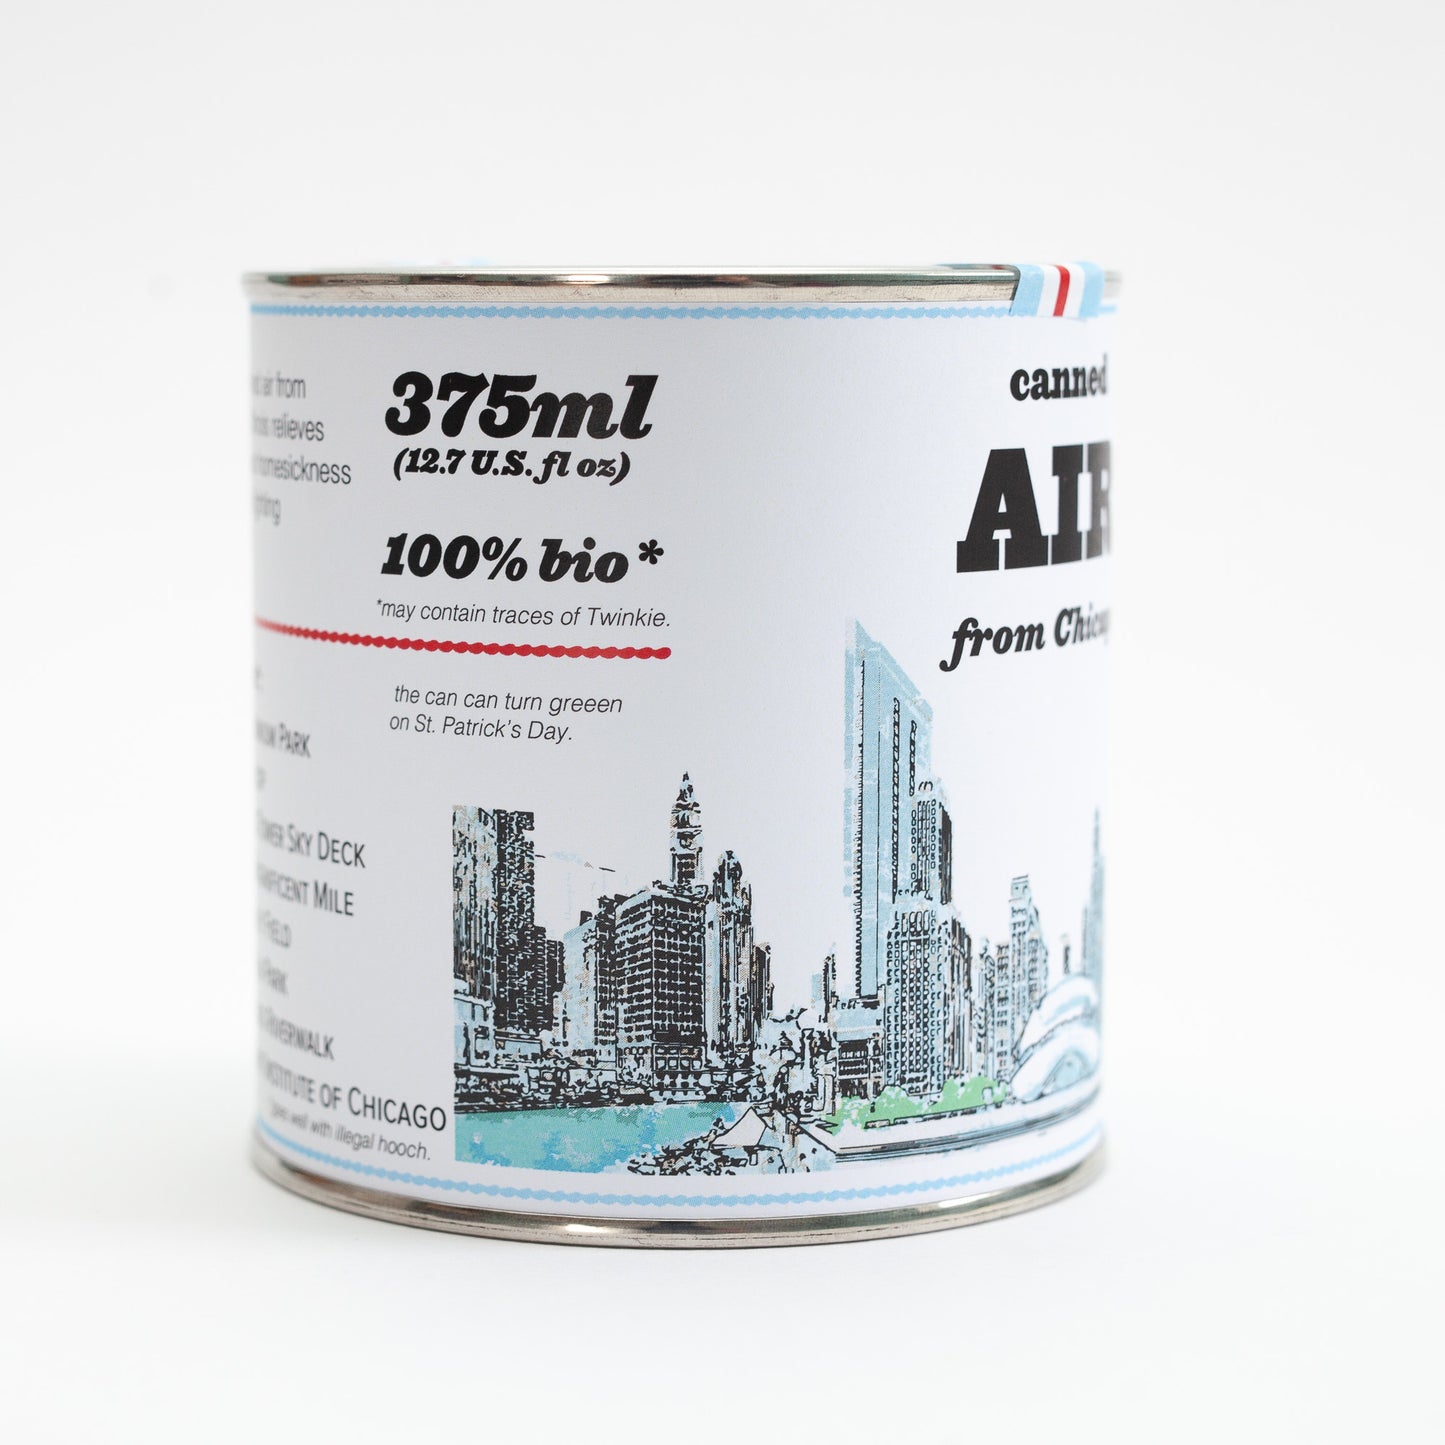 Canned Air from Chicago by Fattroll